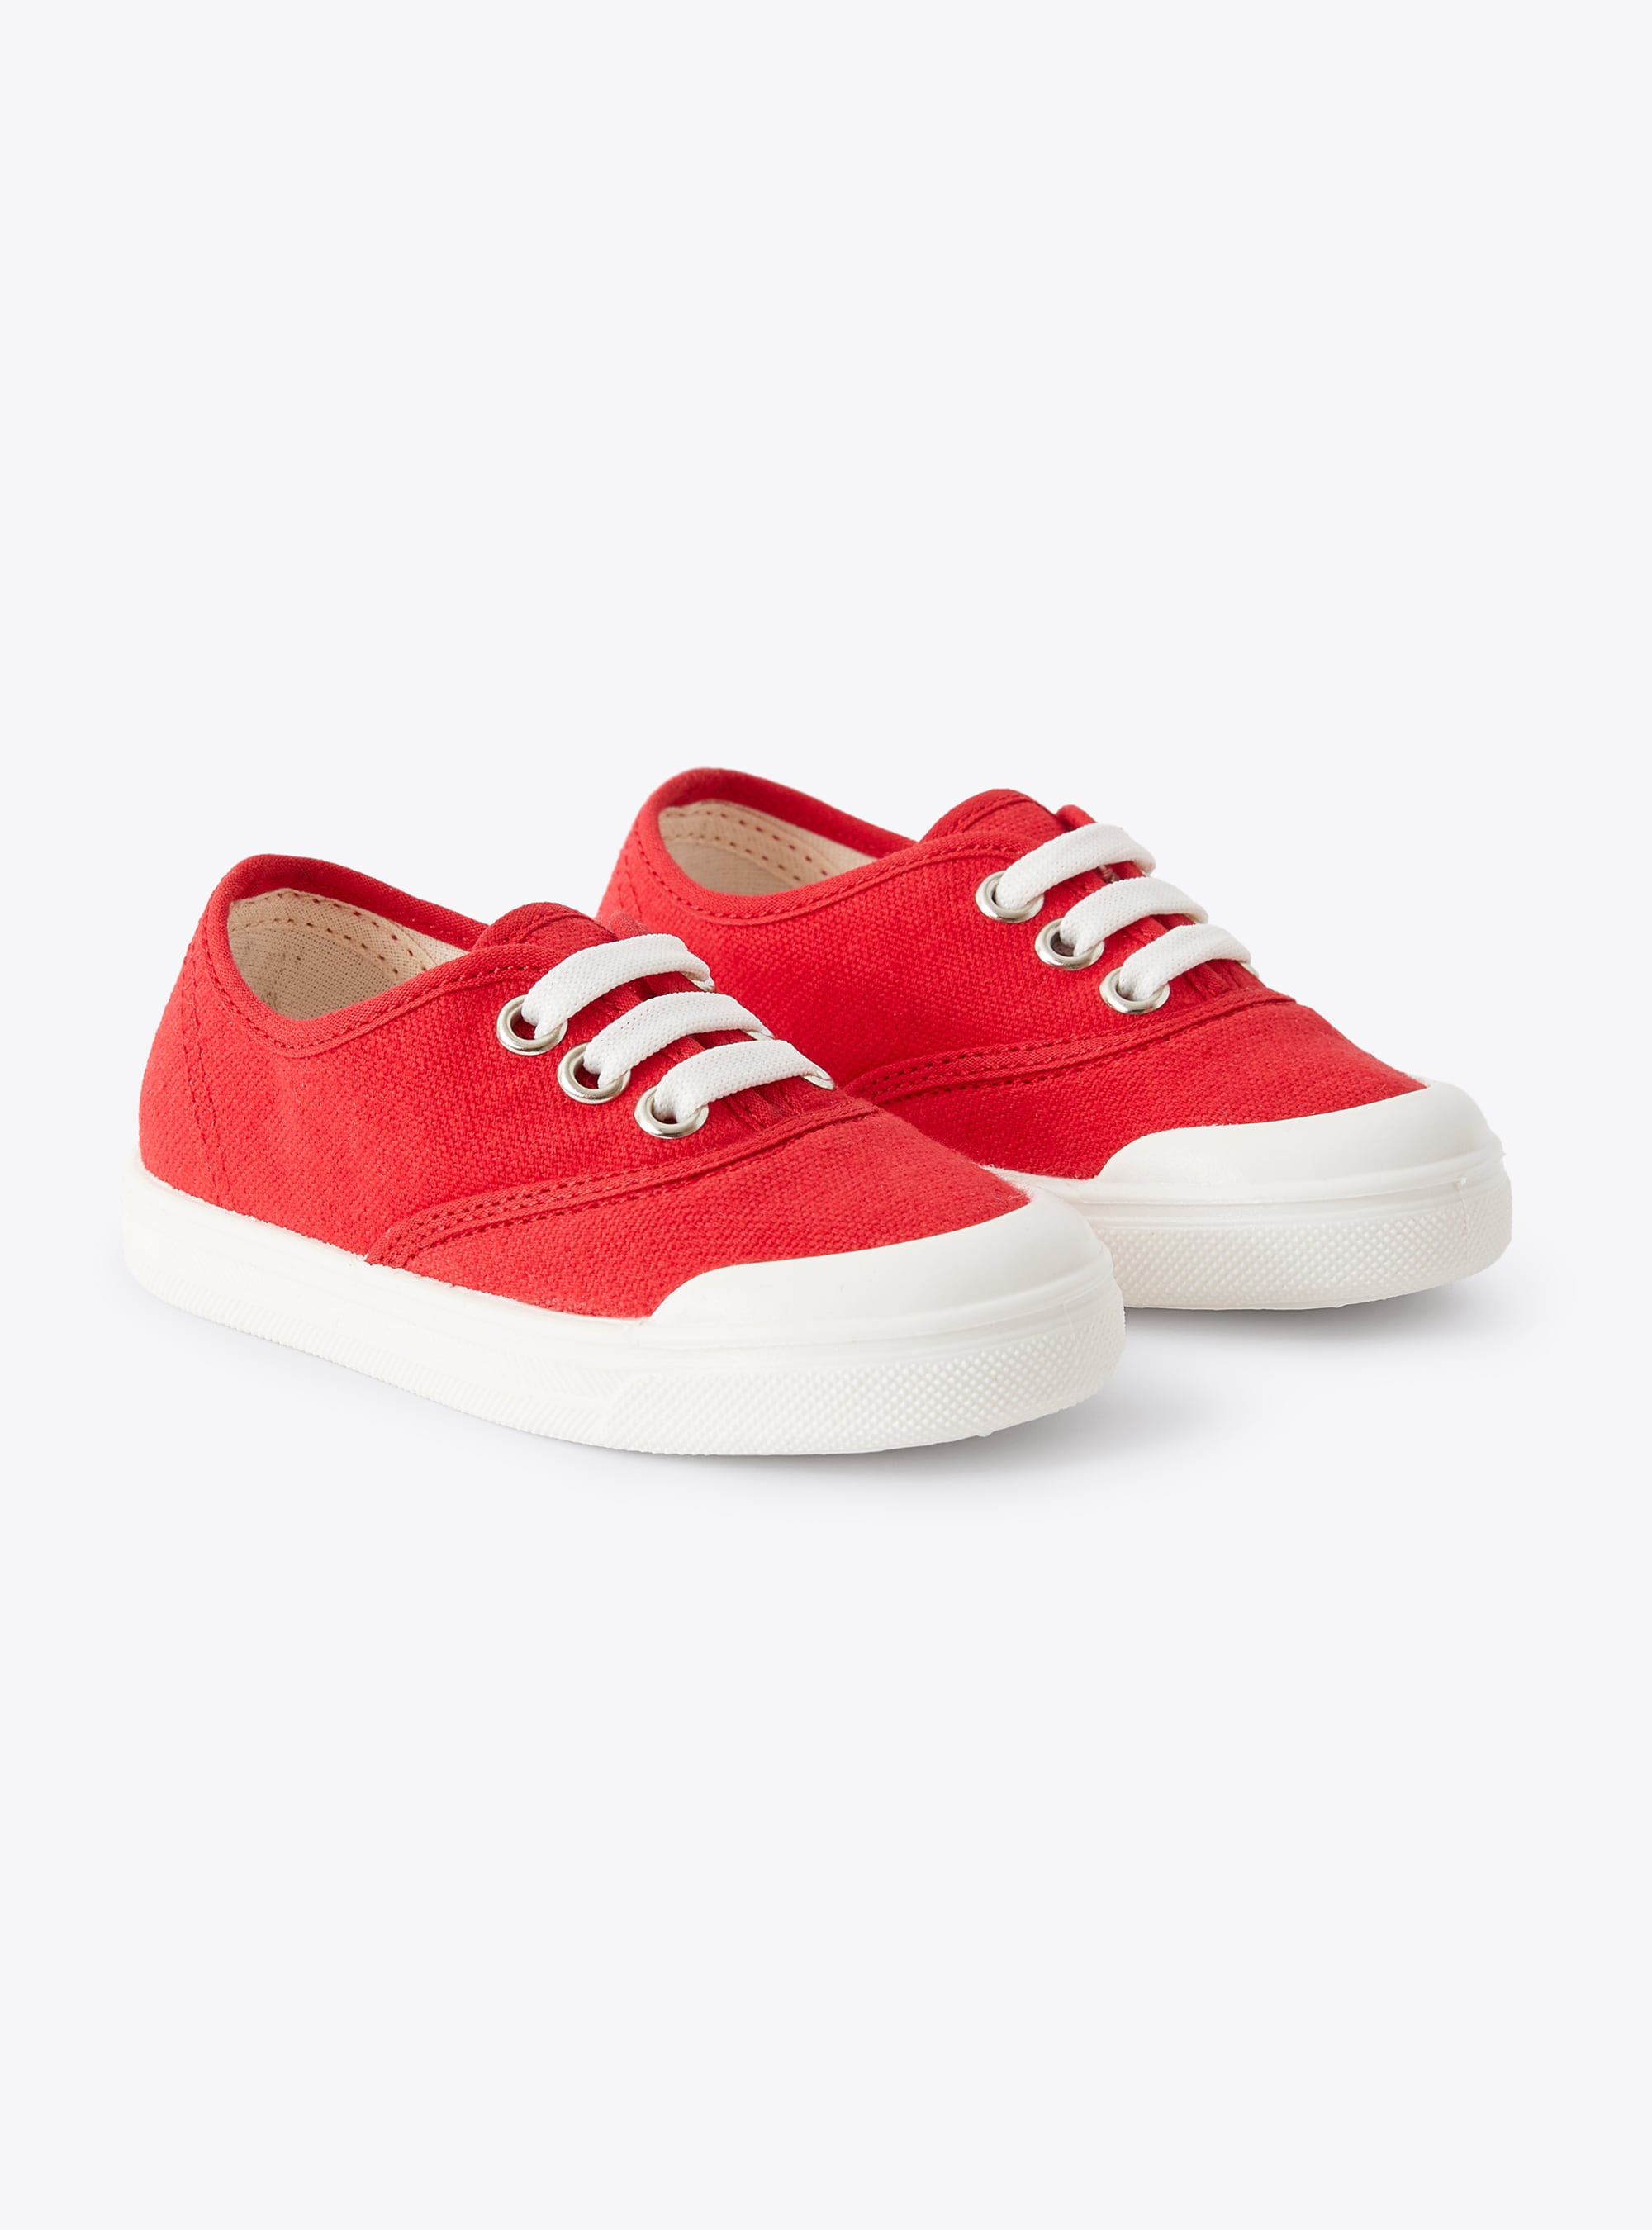 Sneaker in red canvas with laces - Shoes - Il Gufo